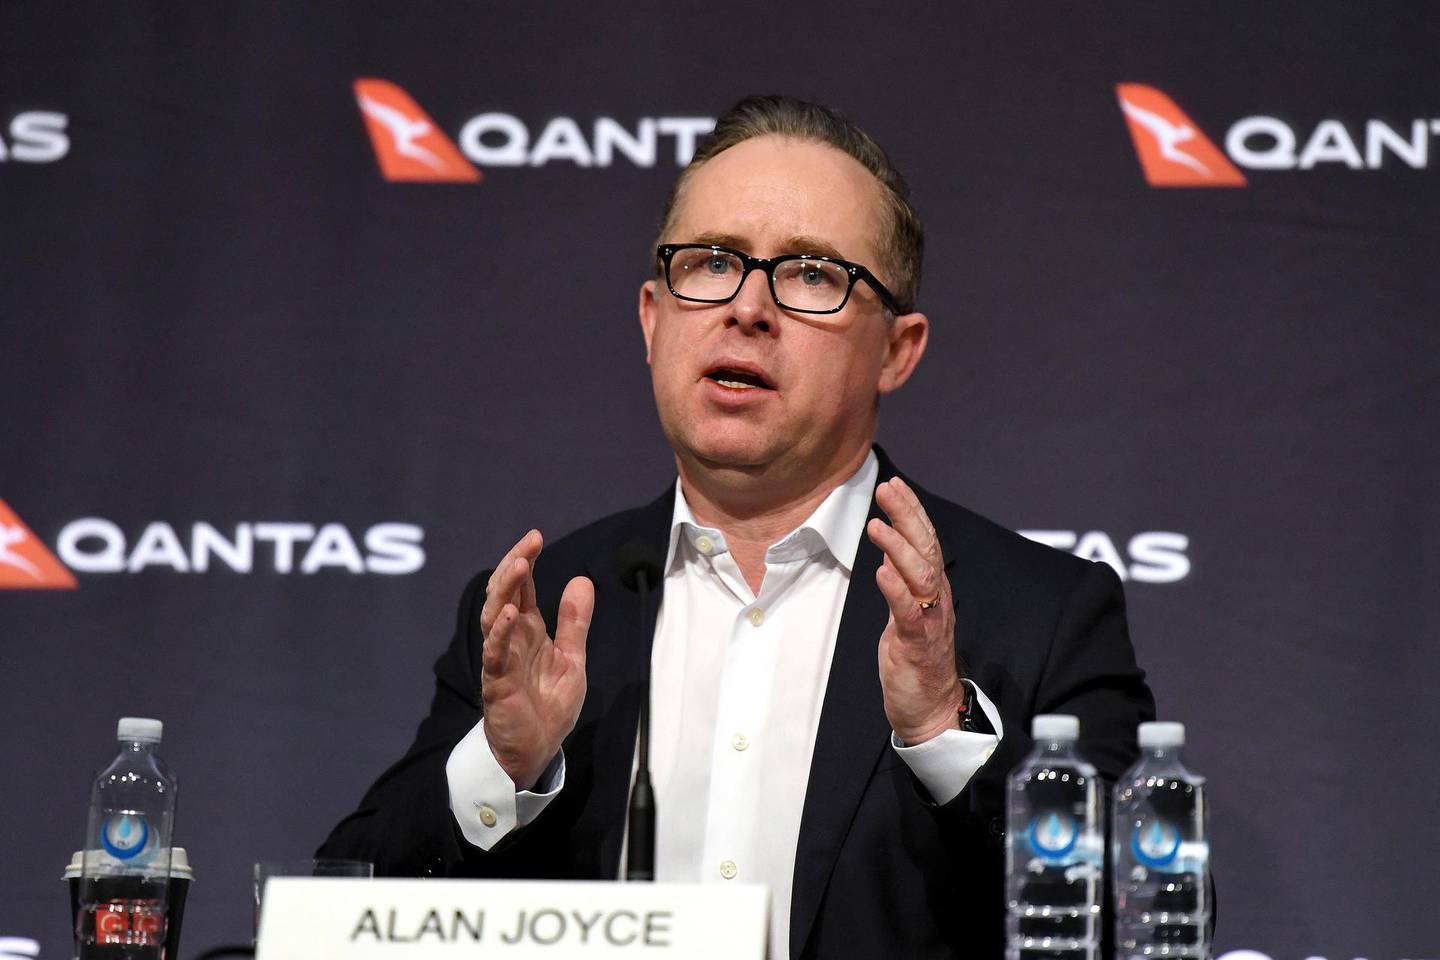 Qantas Chief Executive Alan Joyce speaks during a press conference in Sydney, Thursday, June 25, 2020. Qantas, Australia's largest airline, says it plans to cut at least 6,000 jobs and keep 15,000 more workers on extended furloughs as it tries to survive the coronavirus pandemic. Joyce announced a plan to reduce costs by billions of dollars and raise fresh capital. The plan includes grounding 100 planes for a year or more and immediately retiring its six remaining Boeing 747 planes. (Bianca De Marchi/AAP Image via AP)